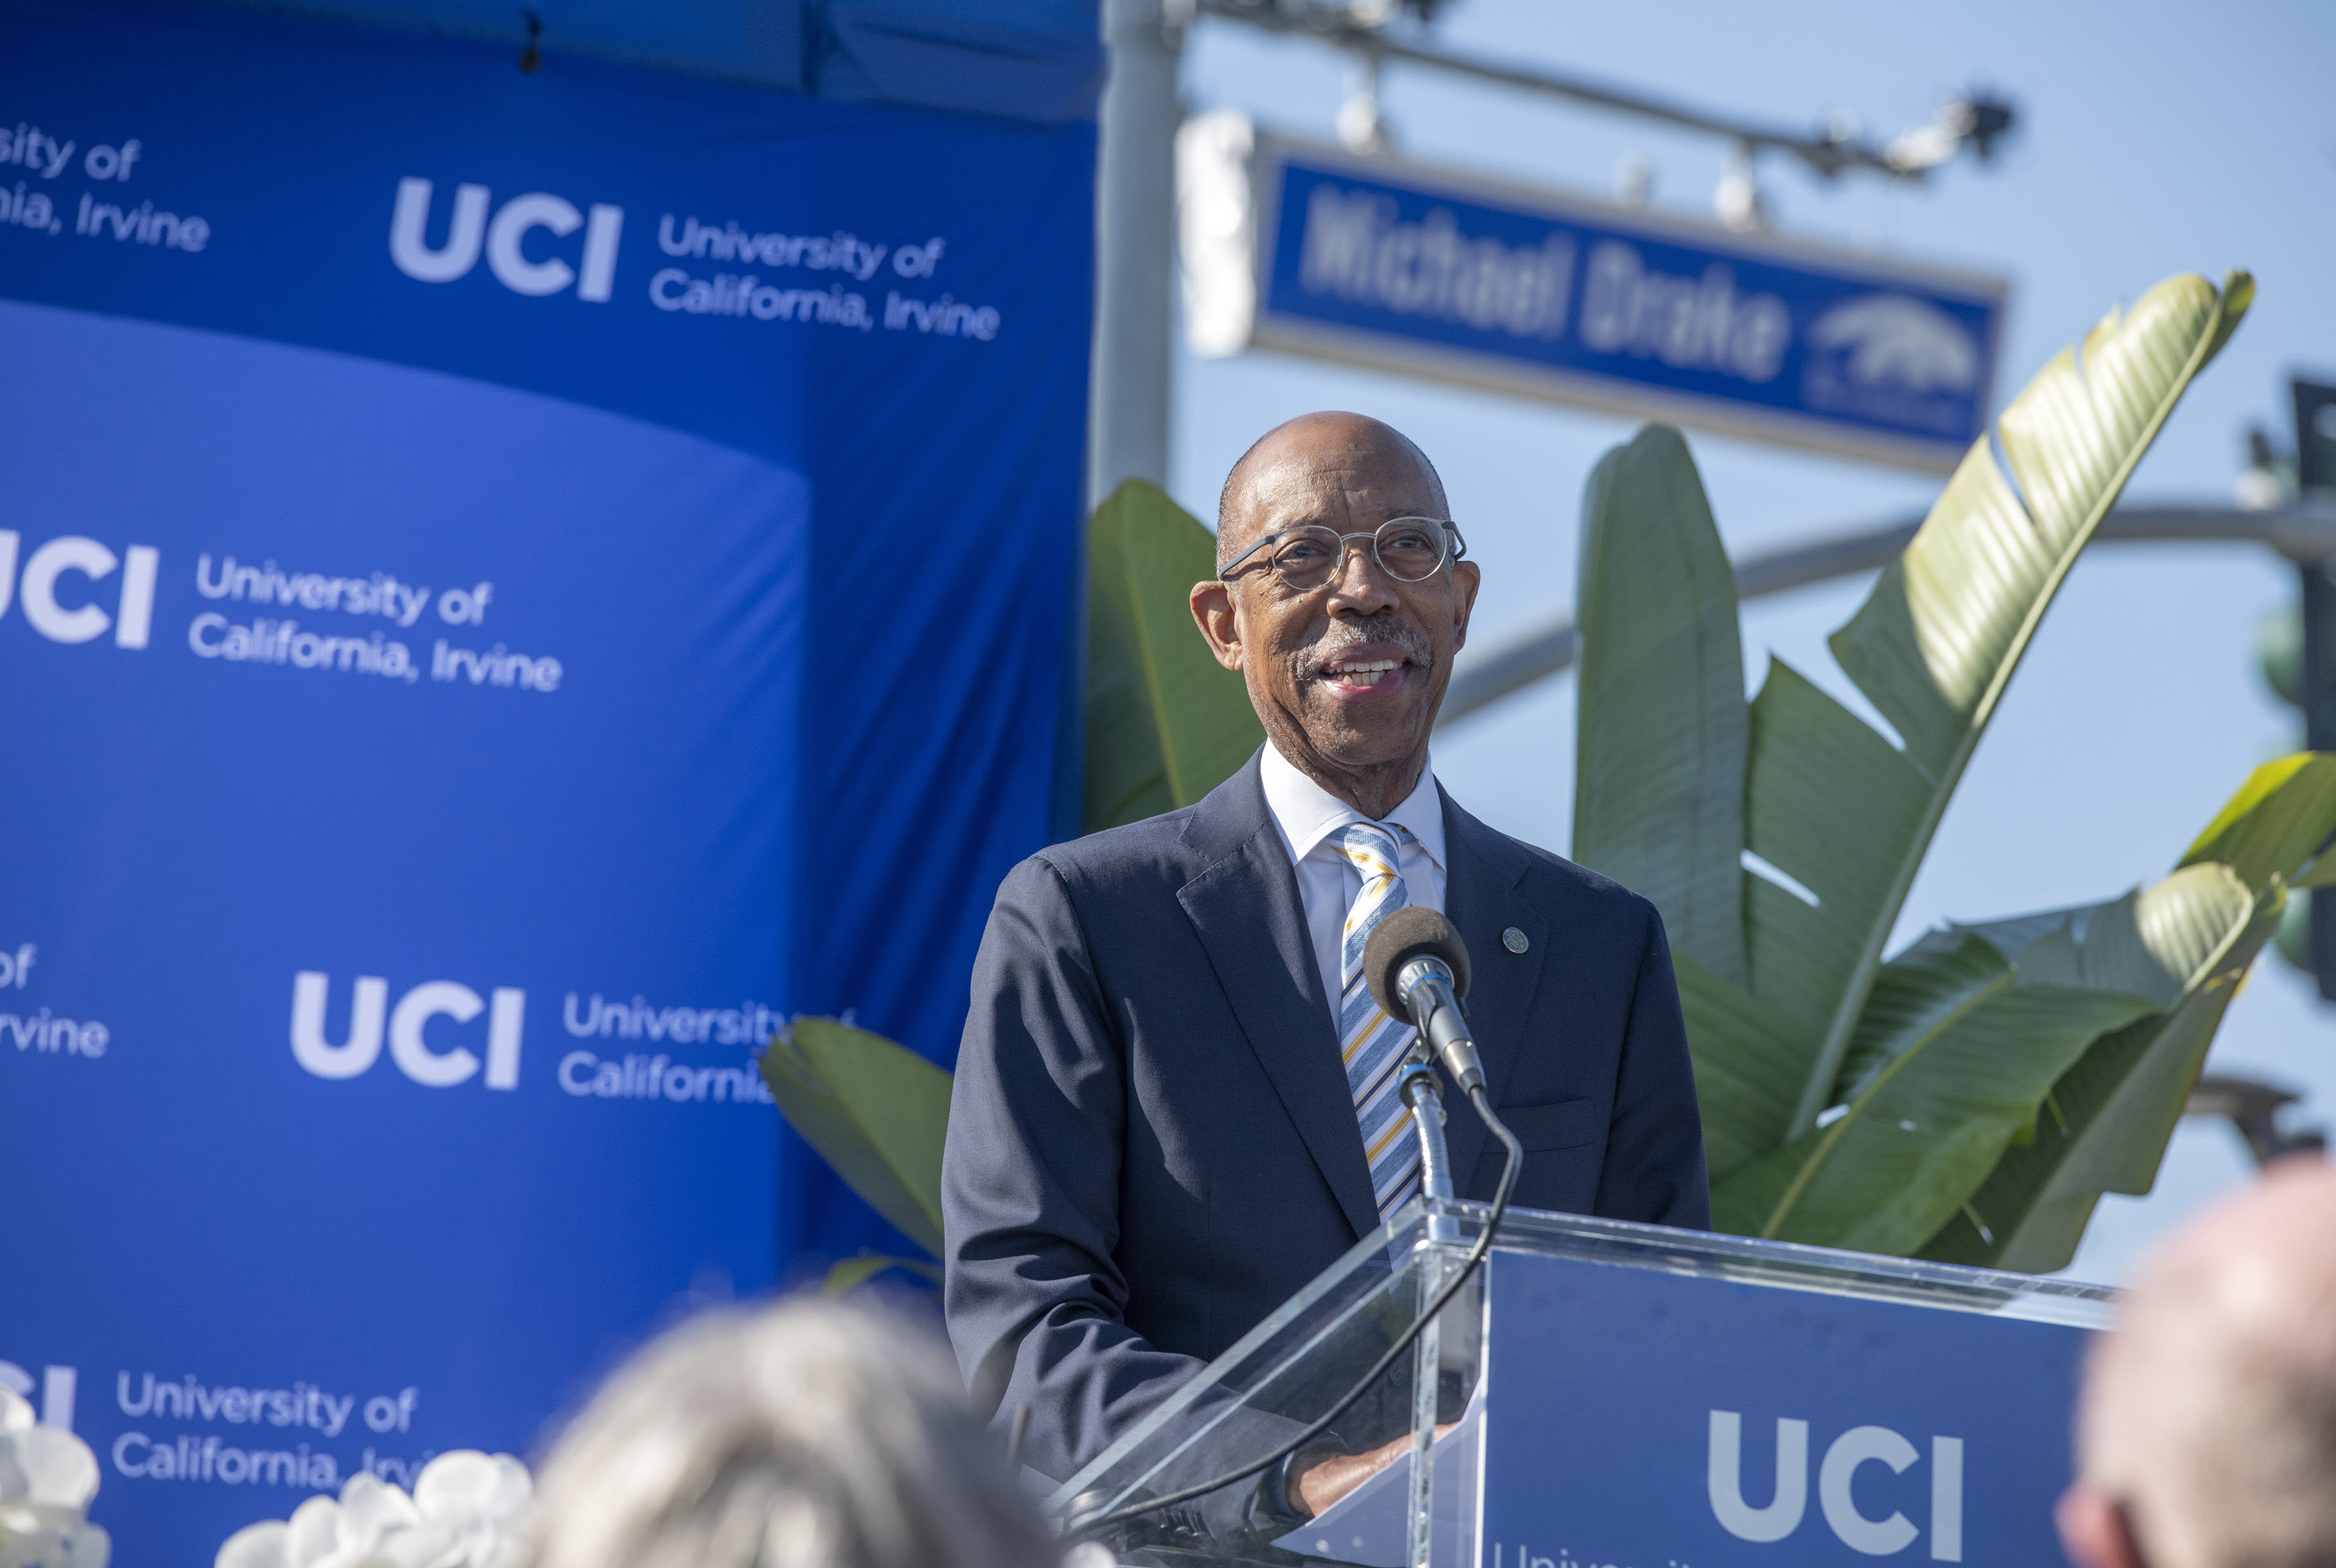 UC President Drake to step down after managing pandemic, policing, protests, budget woes